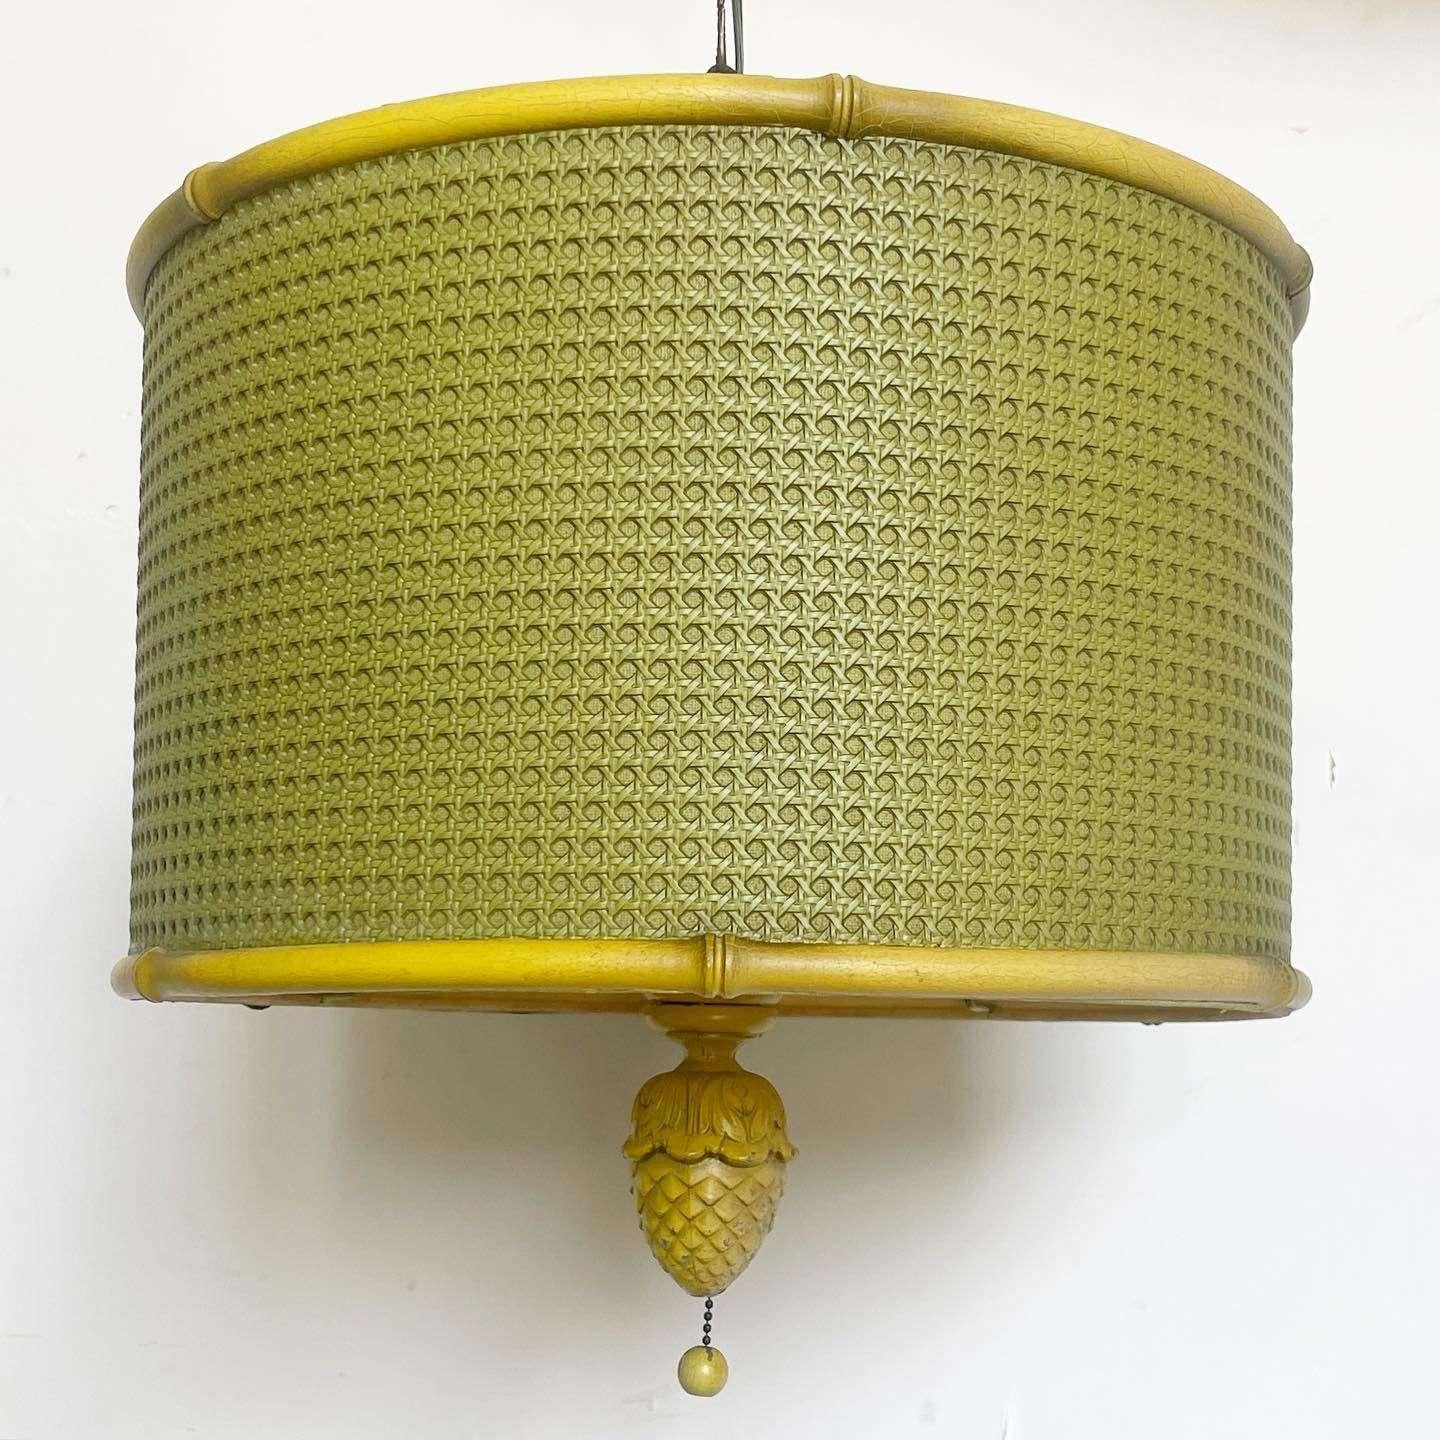 Incredible vintage regency pendant light. Features a green cane side with a yellow faux bamboo frame. Beneath the lamp is shaded by a plastic with a miniature pineapple light switch.

Chain is roughly 13 feet long.